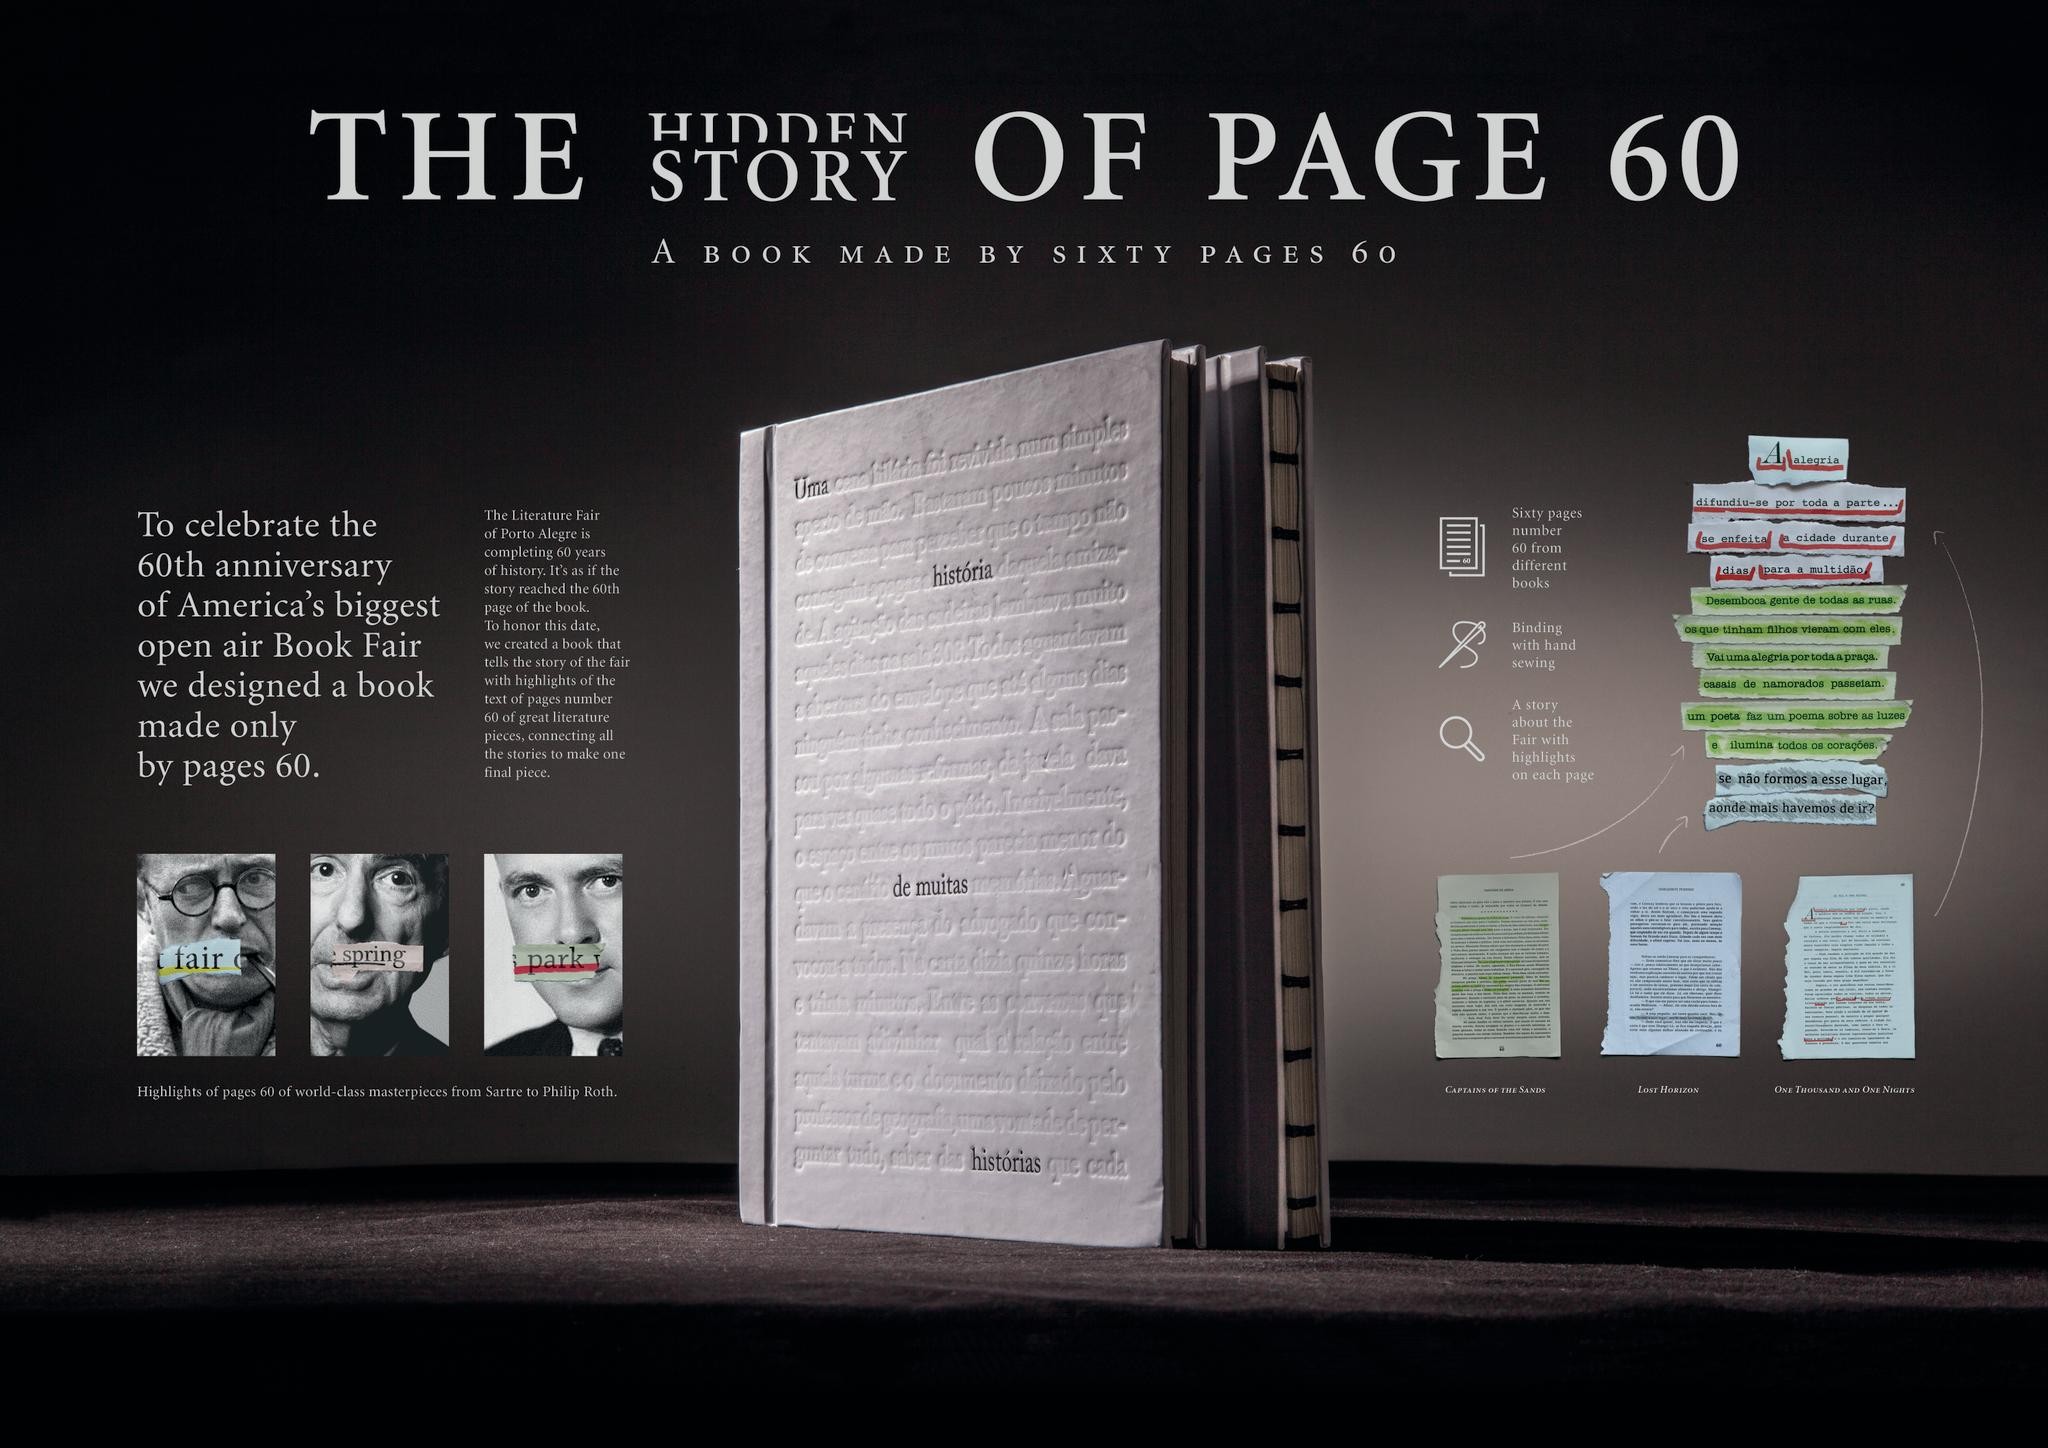 THE HIDDEN STORY OF PAGE 60